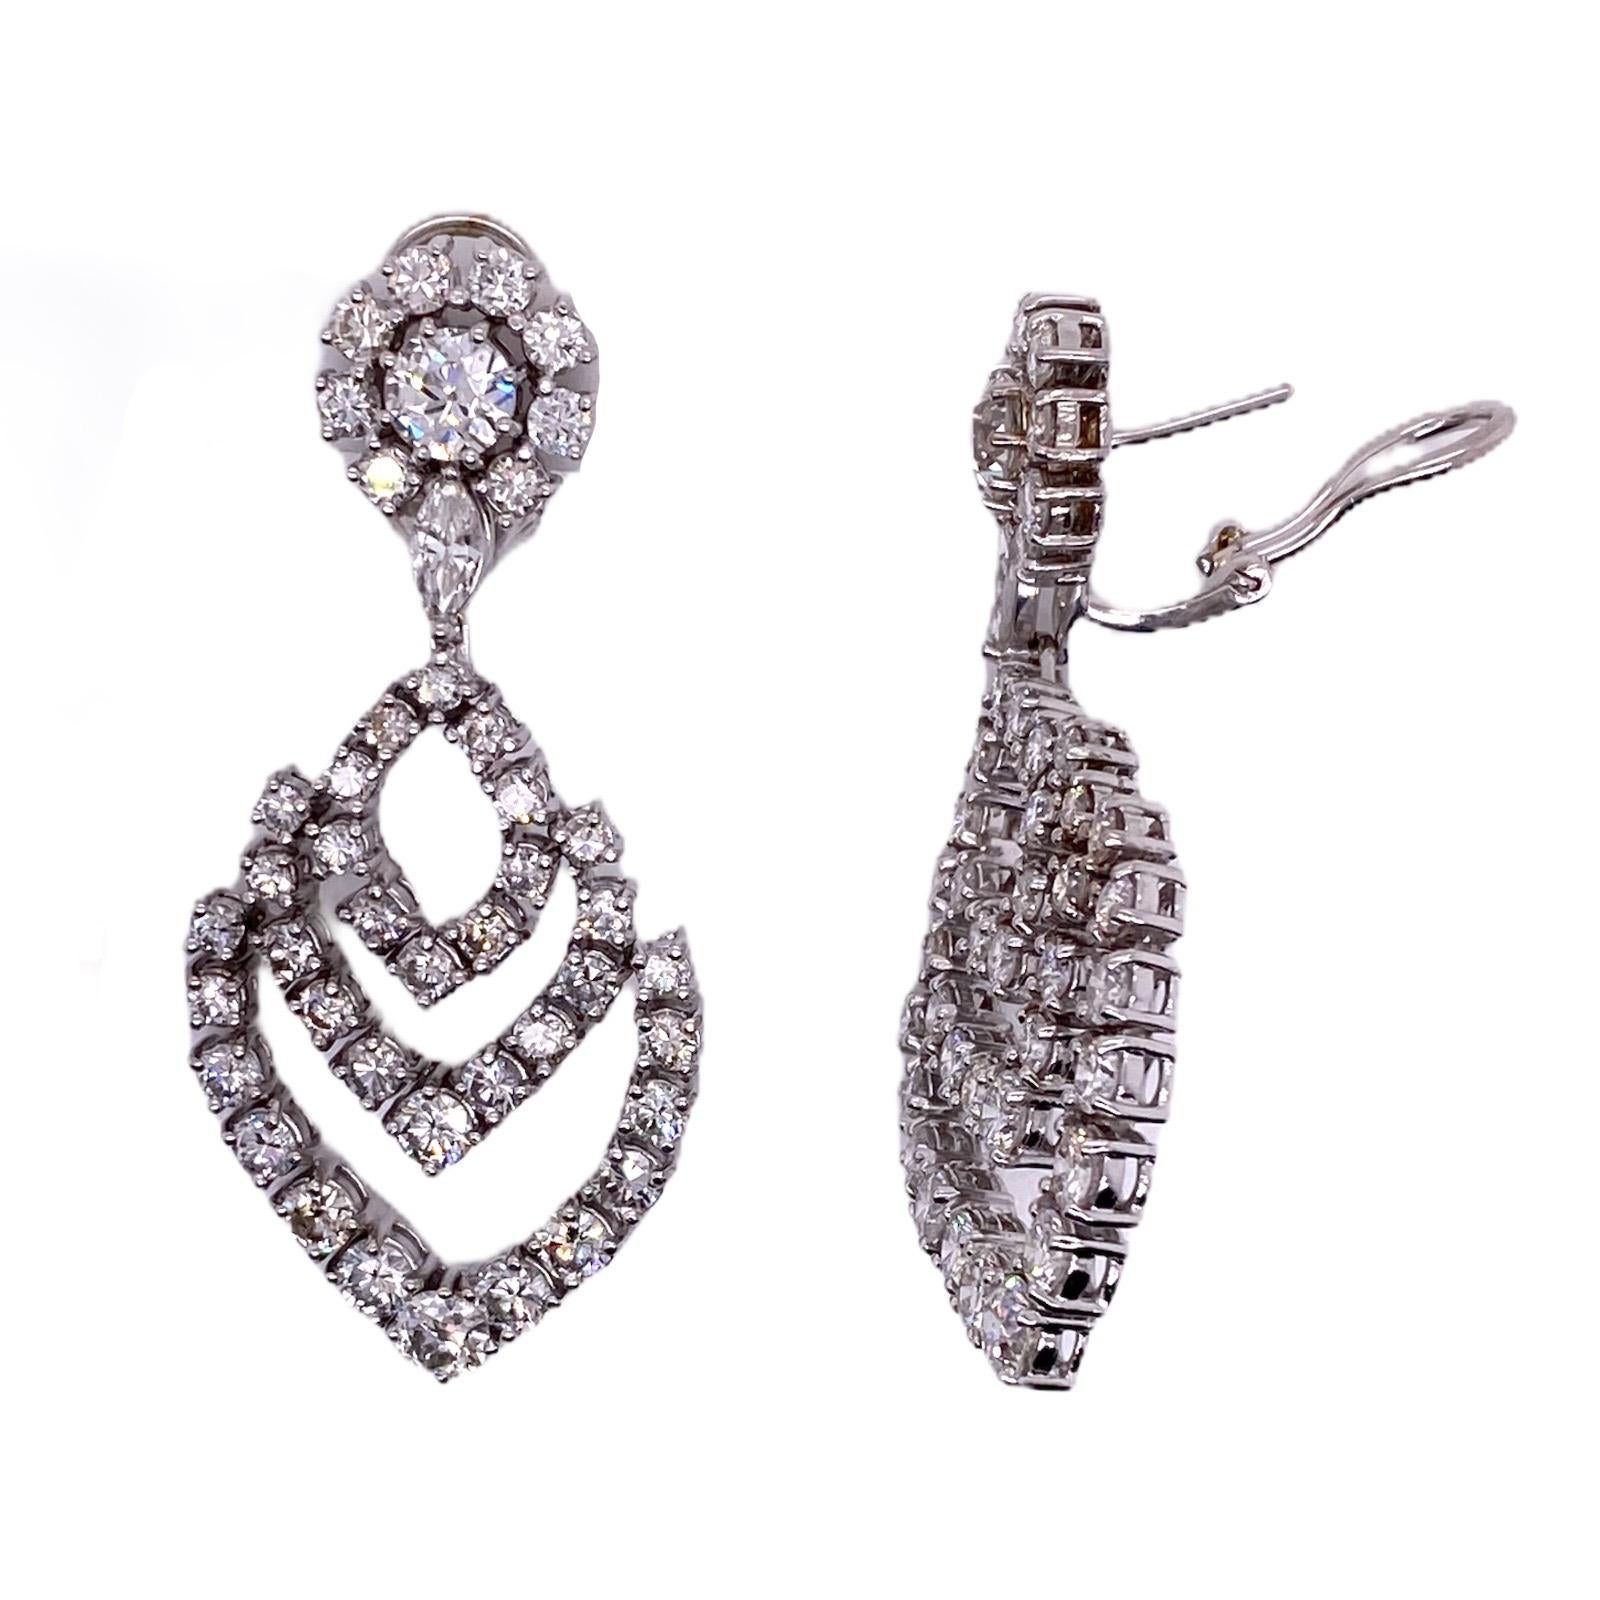 Stunning diamond drop earrings fashioned in 18 karat white gold. The earrings feature 88 round brilliant cut diamonds weighing approximately 9.00 carat total weight. The diamonds are graded F-G color and VS2-SI1 clarity. The earrings measure 2.0